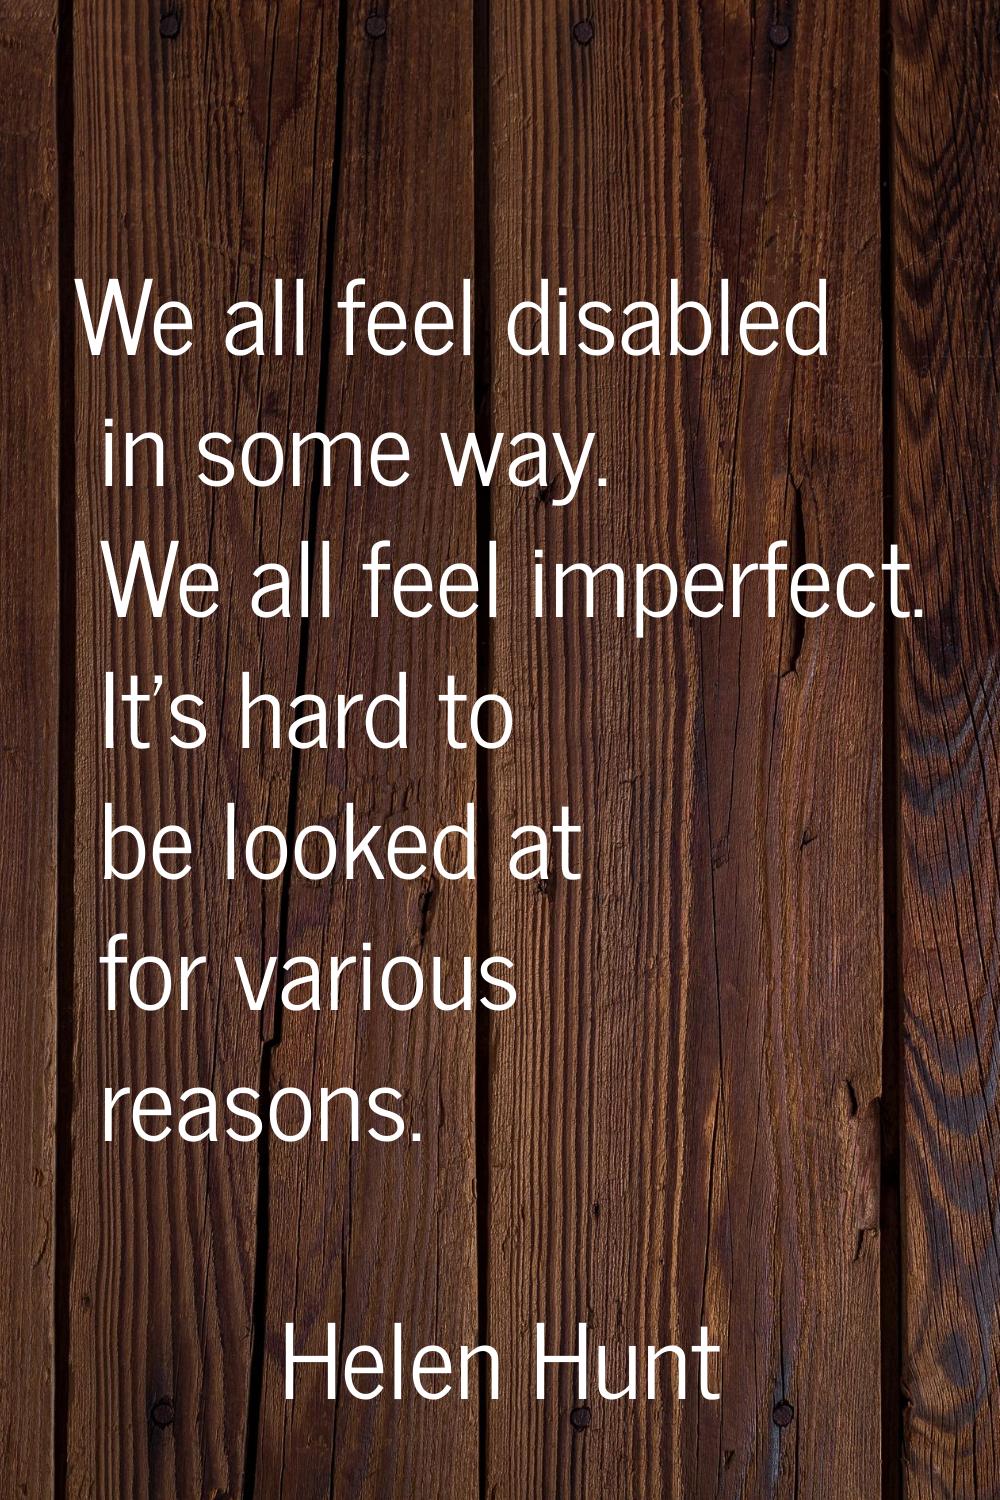 We all feel disabled in some way. We all feel imperfect. It's hard to be looked at for various reas